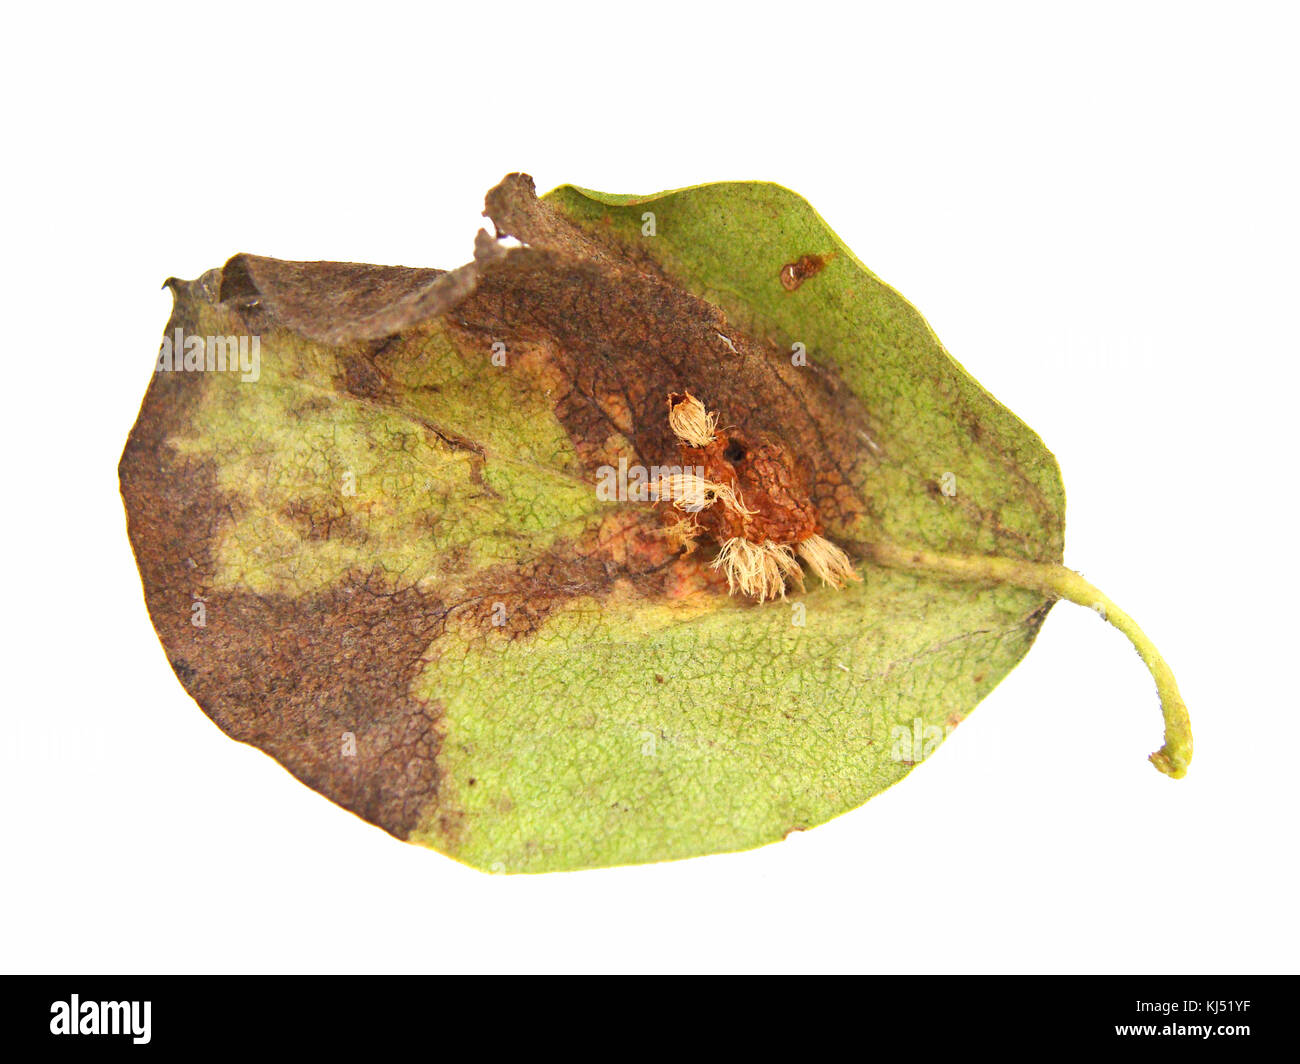 Leaf damaged by fungal disease European pear rust on white background lower side view. Stock Photo